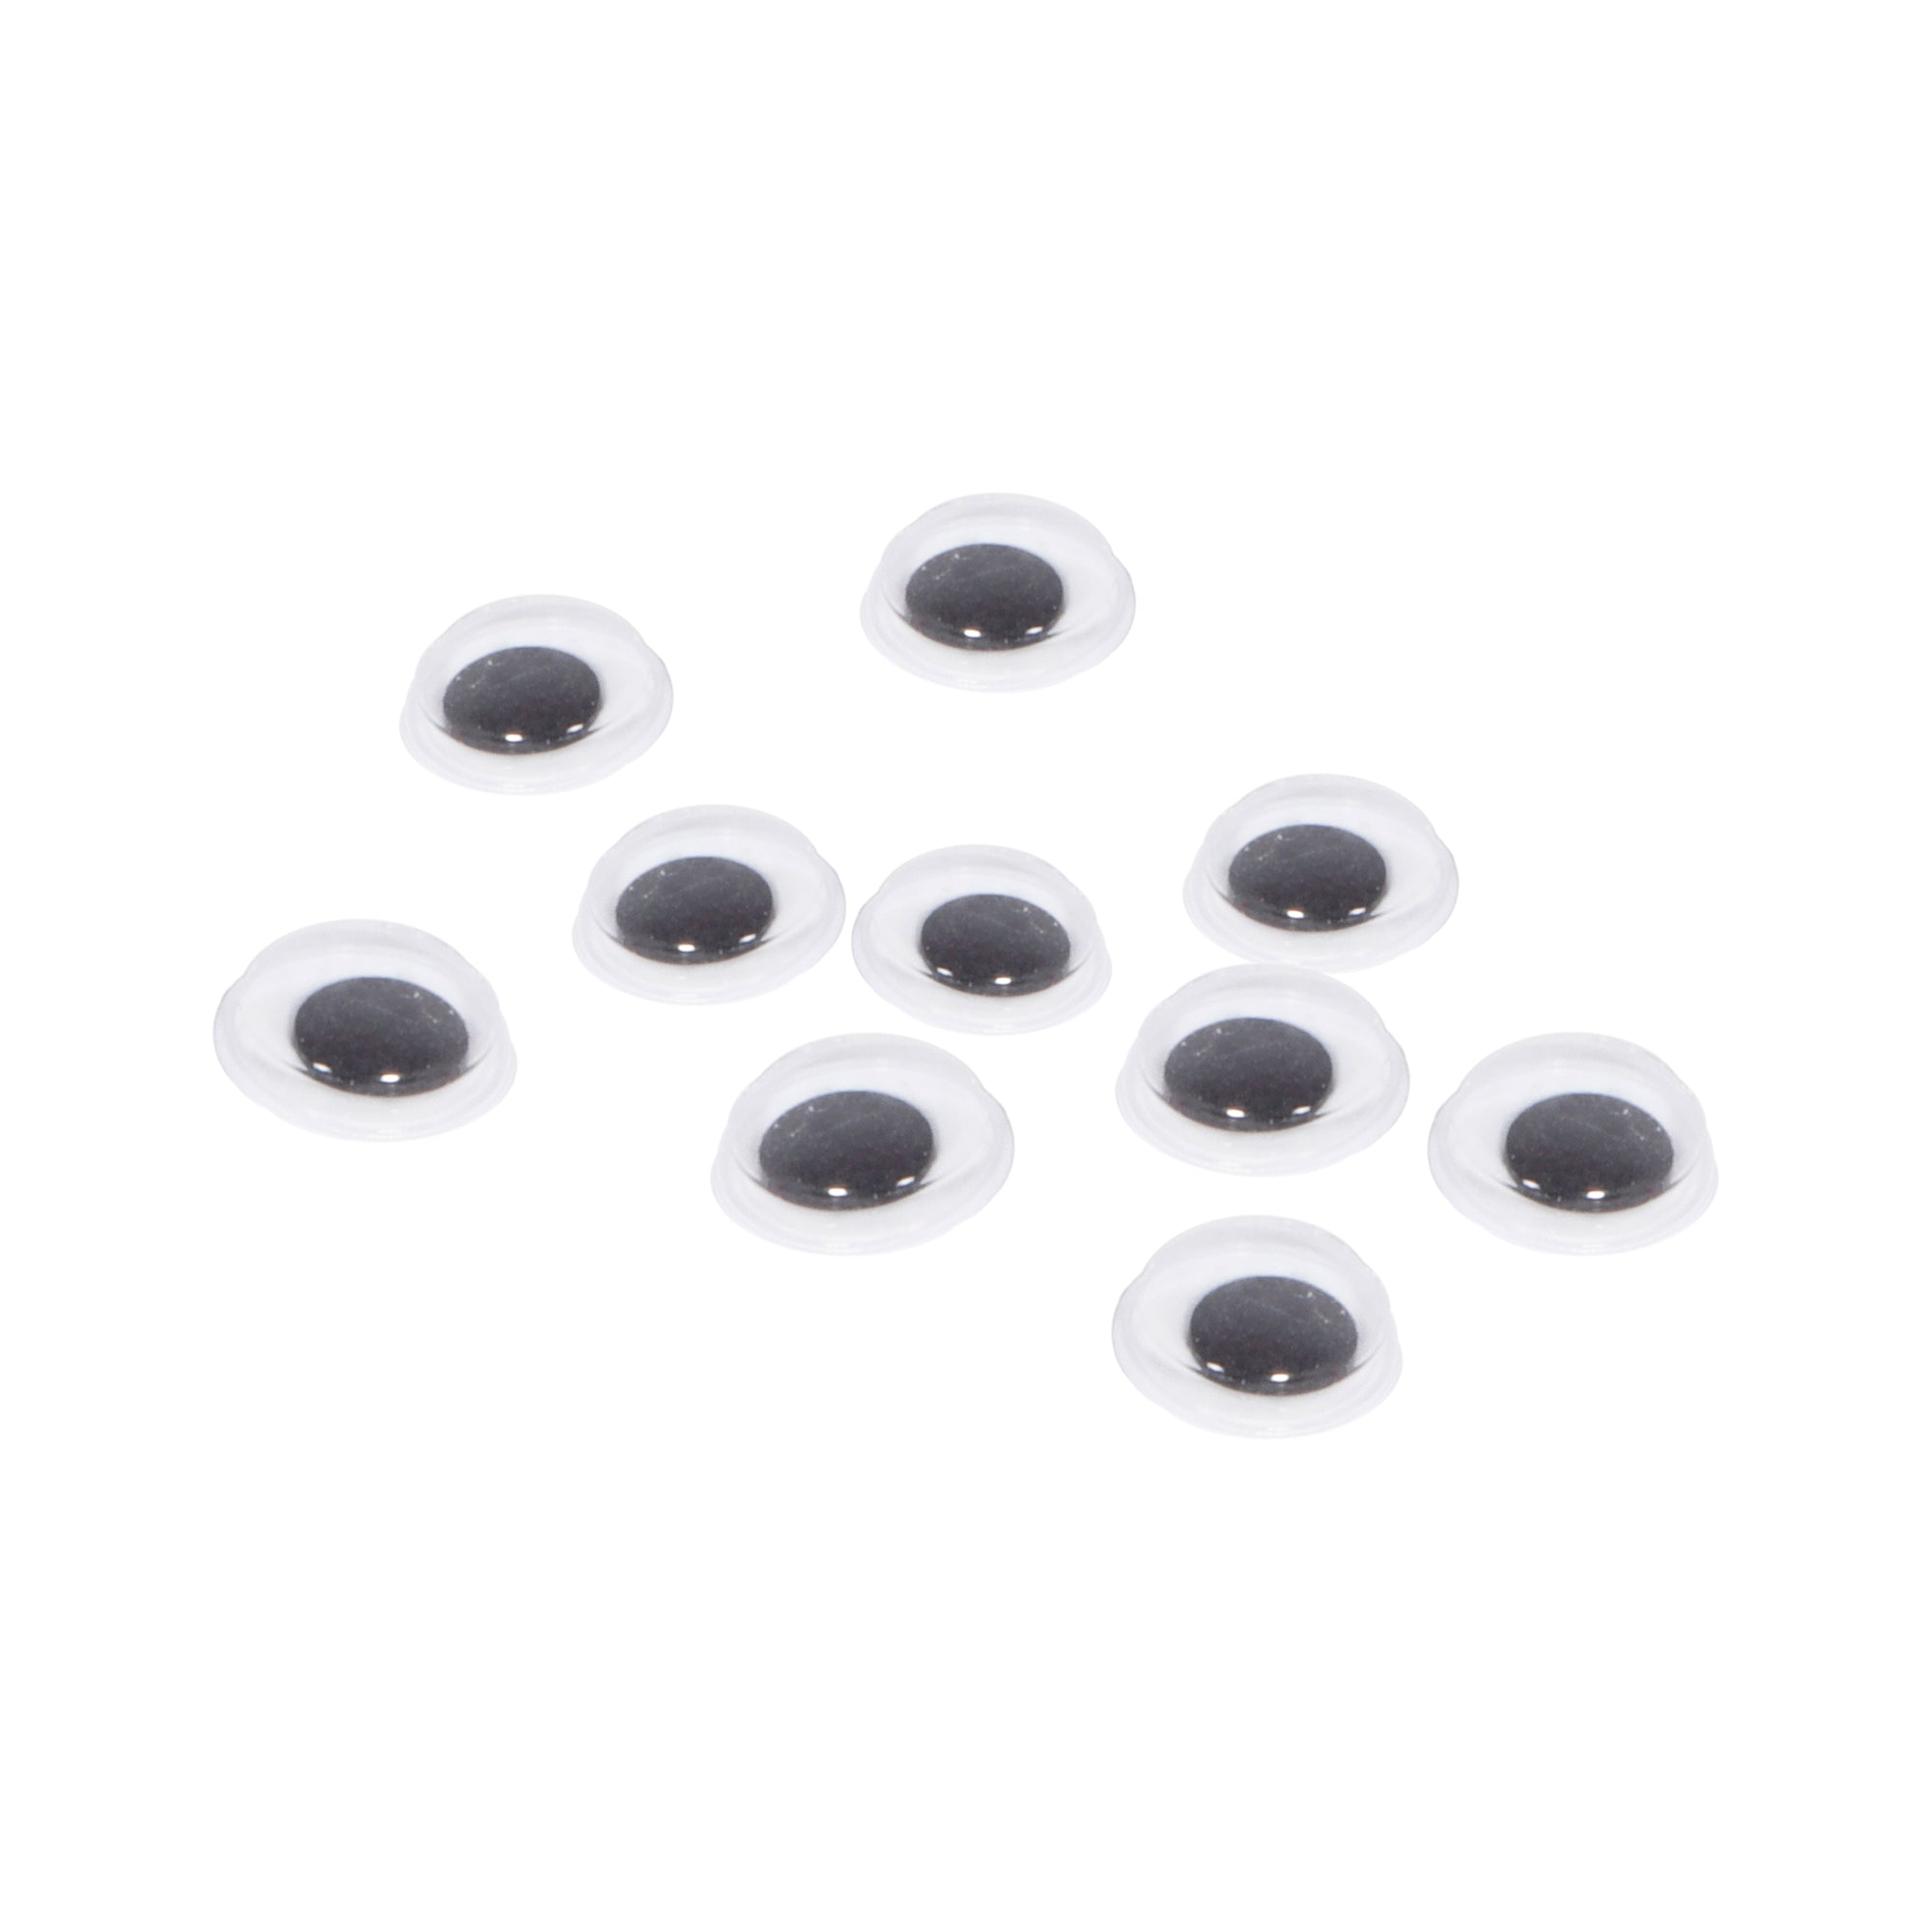 Googly Moving Eyes 8mm 10mm And 12mm 120pcub